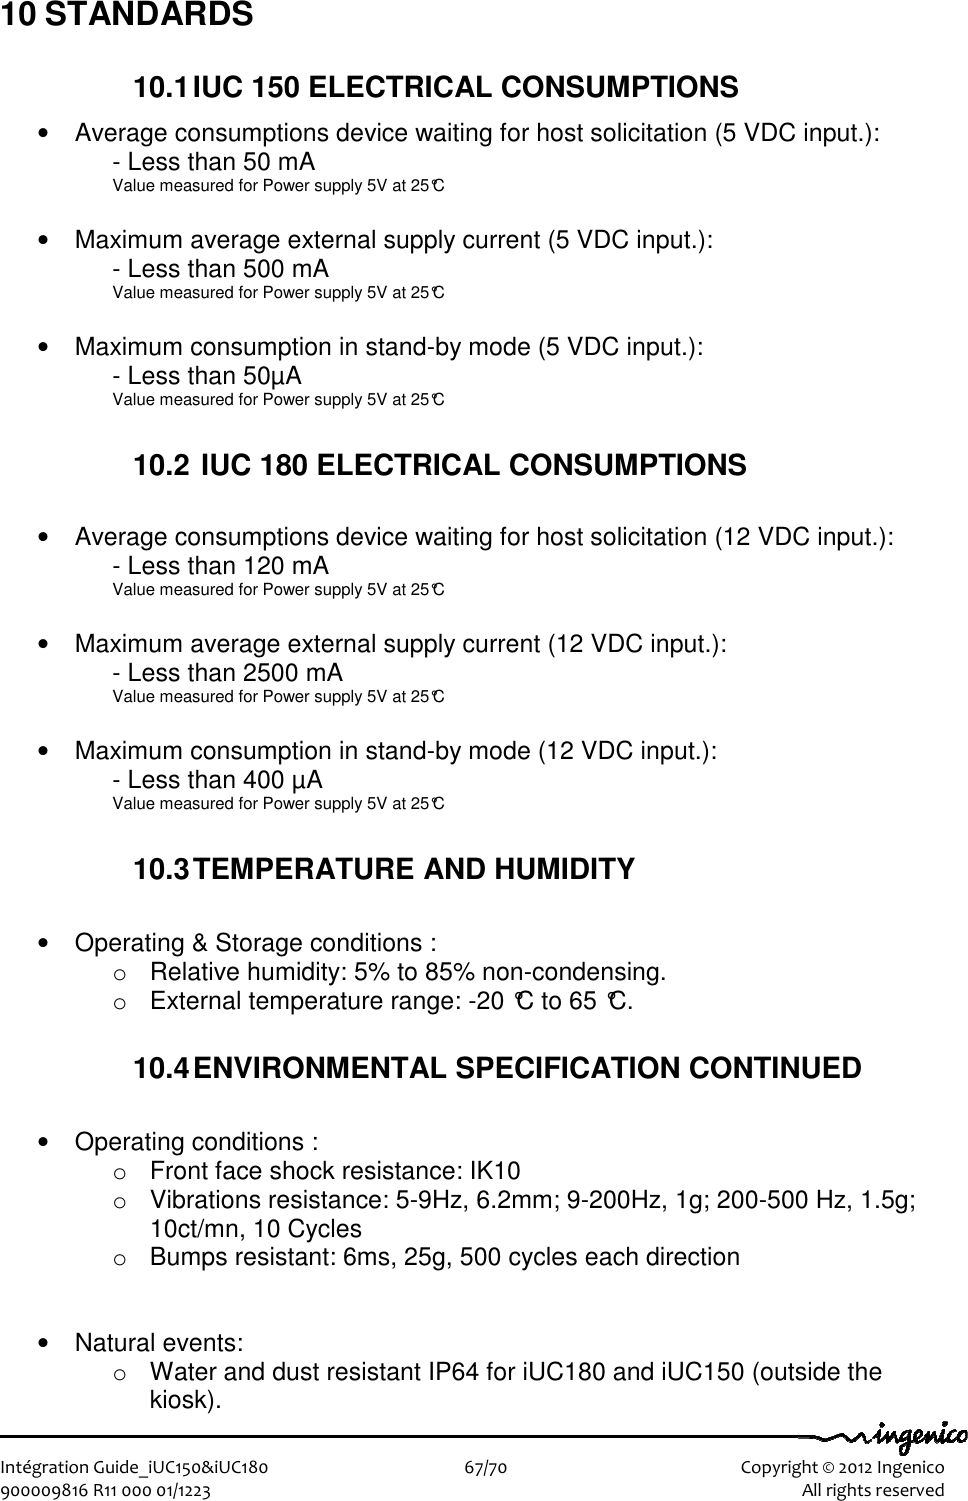   Intégration Guide_iUC150&amp;iUC180                        67/70    Copyright © 2012 Ingenico 900009816 R11 000 01/1223    All rights reserved 10 STANDARDS 10.1 IUC 150 ELECTRICAL CONSUMPTIONS •  Average consumptions device waiting for host solicitation (5 VDC input.): - Less than 50 mA Value measured for Power supply 5V at 25°C  •  Maximum average external supply current (5 VDC input.):  - Less than 500 mA Value measured for Power supply 5V at 25°C  •  Maximum consumption in stand-by mode (5 VDC input.): - Less than 50µA Value measured for Power supply 5V at 25°C  10.2  IUC 180 ELECTRICAL CONSUMPTIONS  •  Average consumptions device waiting for host solicitation (12 VDC input.): - Less than 120 mA Value measured for Power supply 5V at 25°C  •  Maximum average external supply current (12 VDC input.):  - Less than 2500 mA Value measured for Power supply 5V at 25°C  •  Maximum consumption in stand-by mode (12 VDC input.): - Less than 400 µA Value measured for Power supply 5V at 25°C  10.3 TEMPERATURE AND HUMIDITY  •  Operating &amp; Storage conditions : o  Relative humidity: 5% to 85% non-condensing. o  External temperature range: -20 °C to 65 °C.  10.4 ENVIRONMENTAL SPECIFICATION CONTINUED  •  Operating conditions : o  Front face shock resistance: IK10 o  Vibrations resistance: 5-9Hz, 6.2mm; 9-200Hz, 1g; 200-500 Hz, 1.5g; 10ct/mn, 10 Cycles o  Bumps resistant: 6ms, 25g, 500 cycles each direction   •  Natural events: o  Water and dust resistant IP64 for iUC180 and iUC150 (outside the kiosk). 